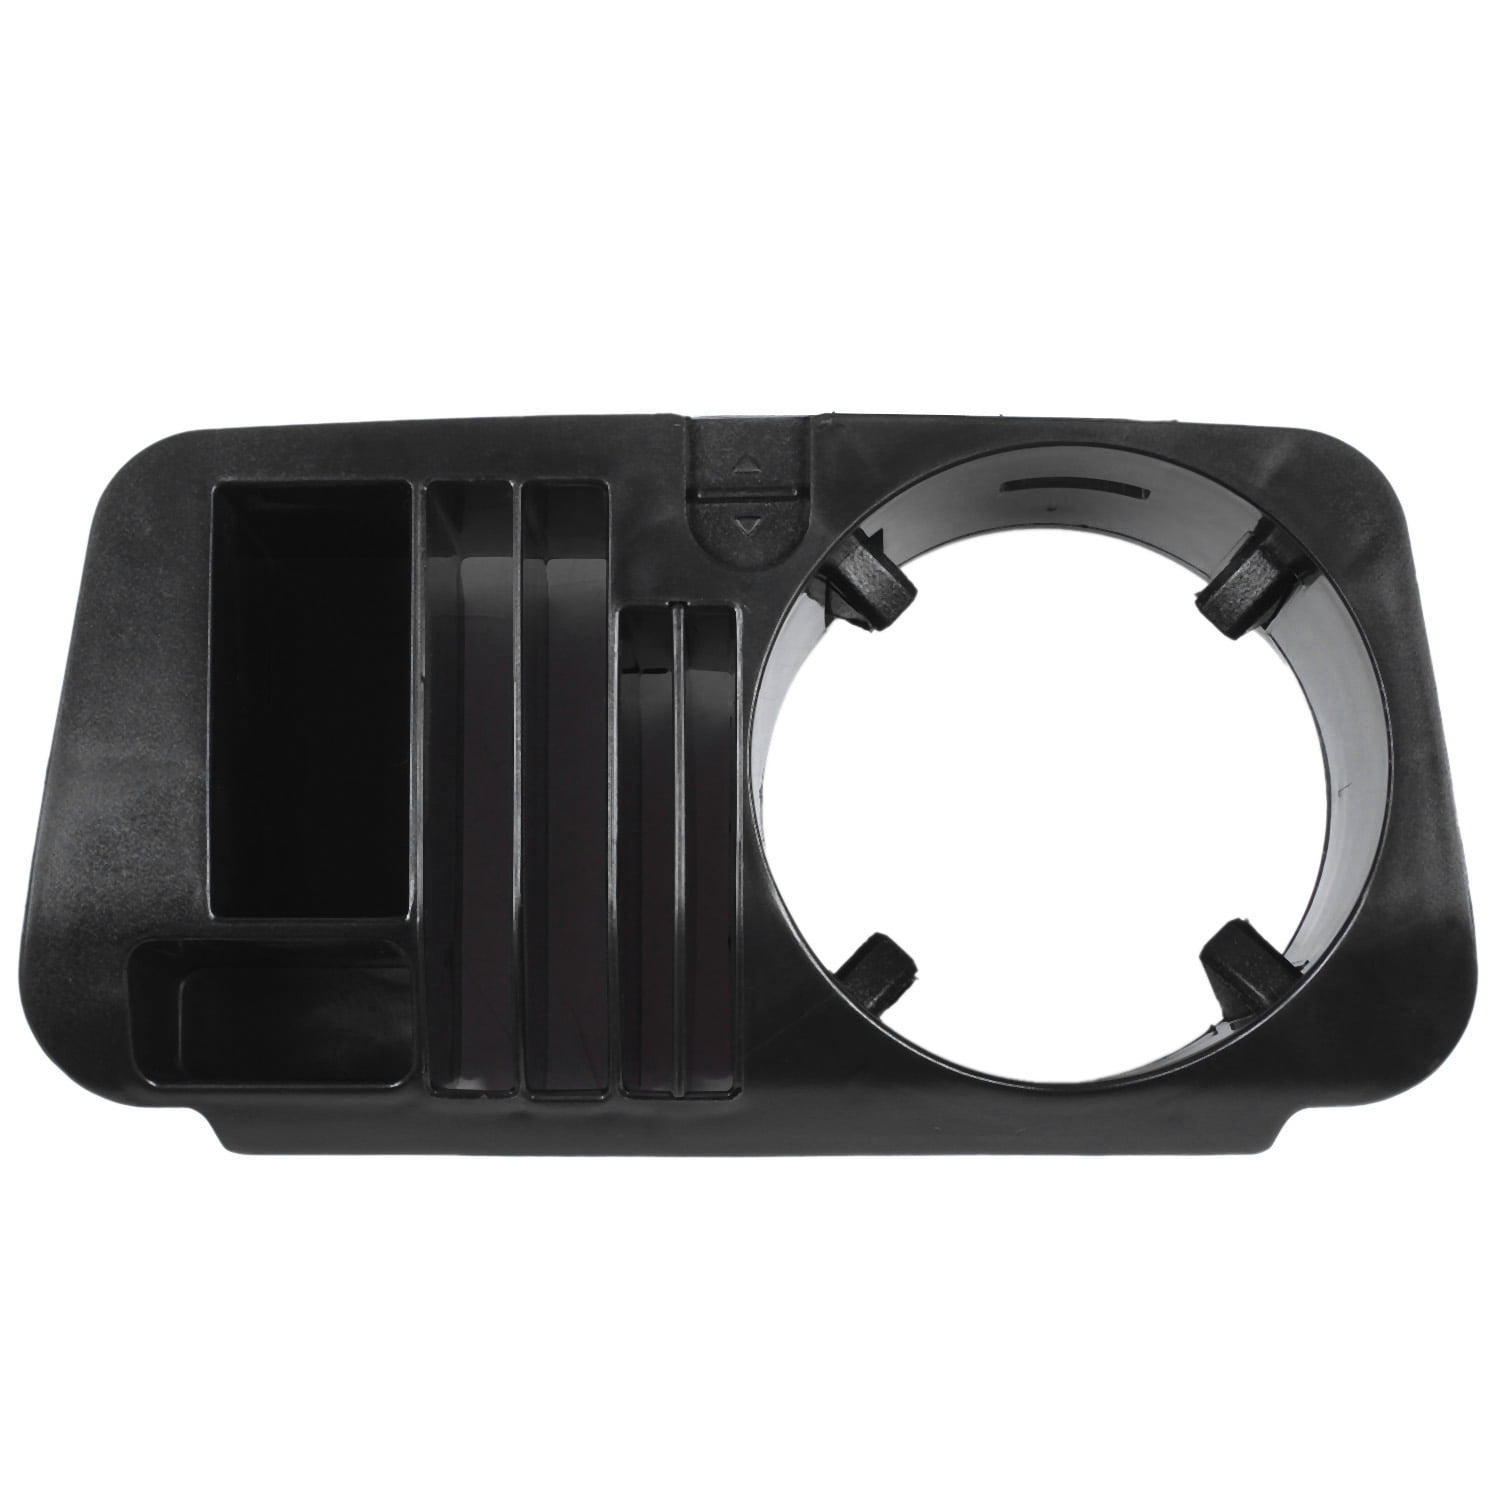 Central Water Cup Holder Box Storage For Mercedes Benz E class W213 2016 2017